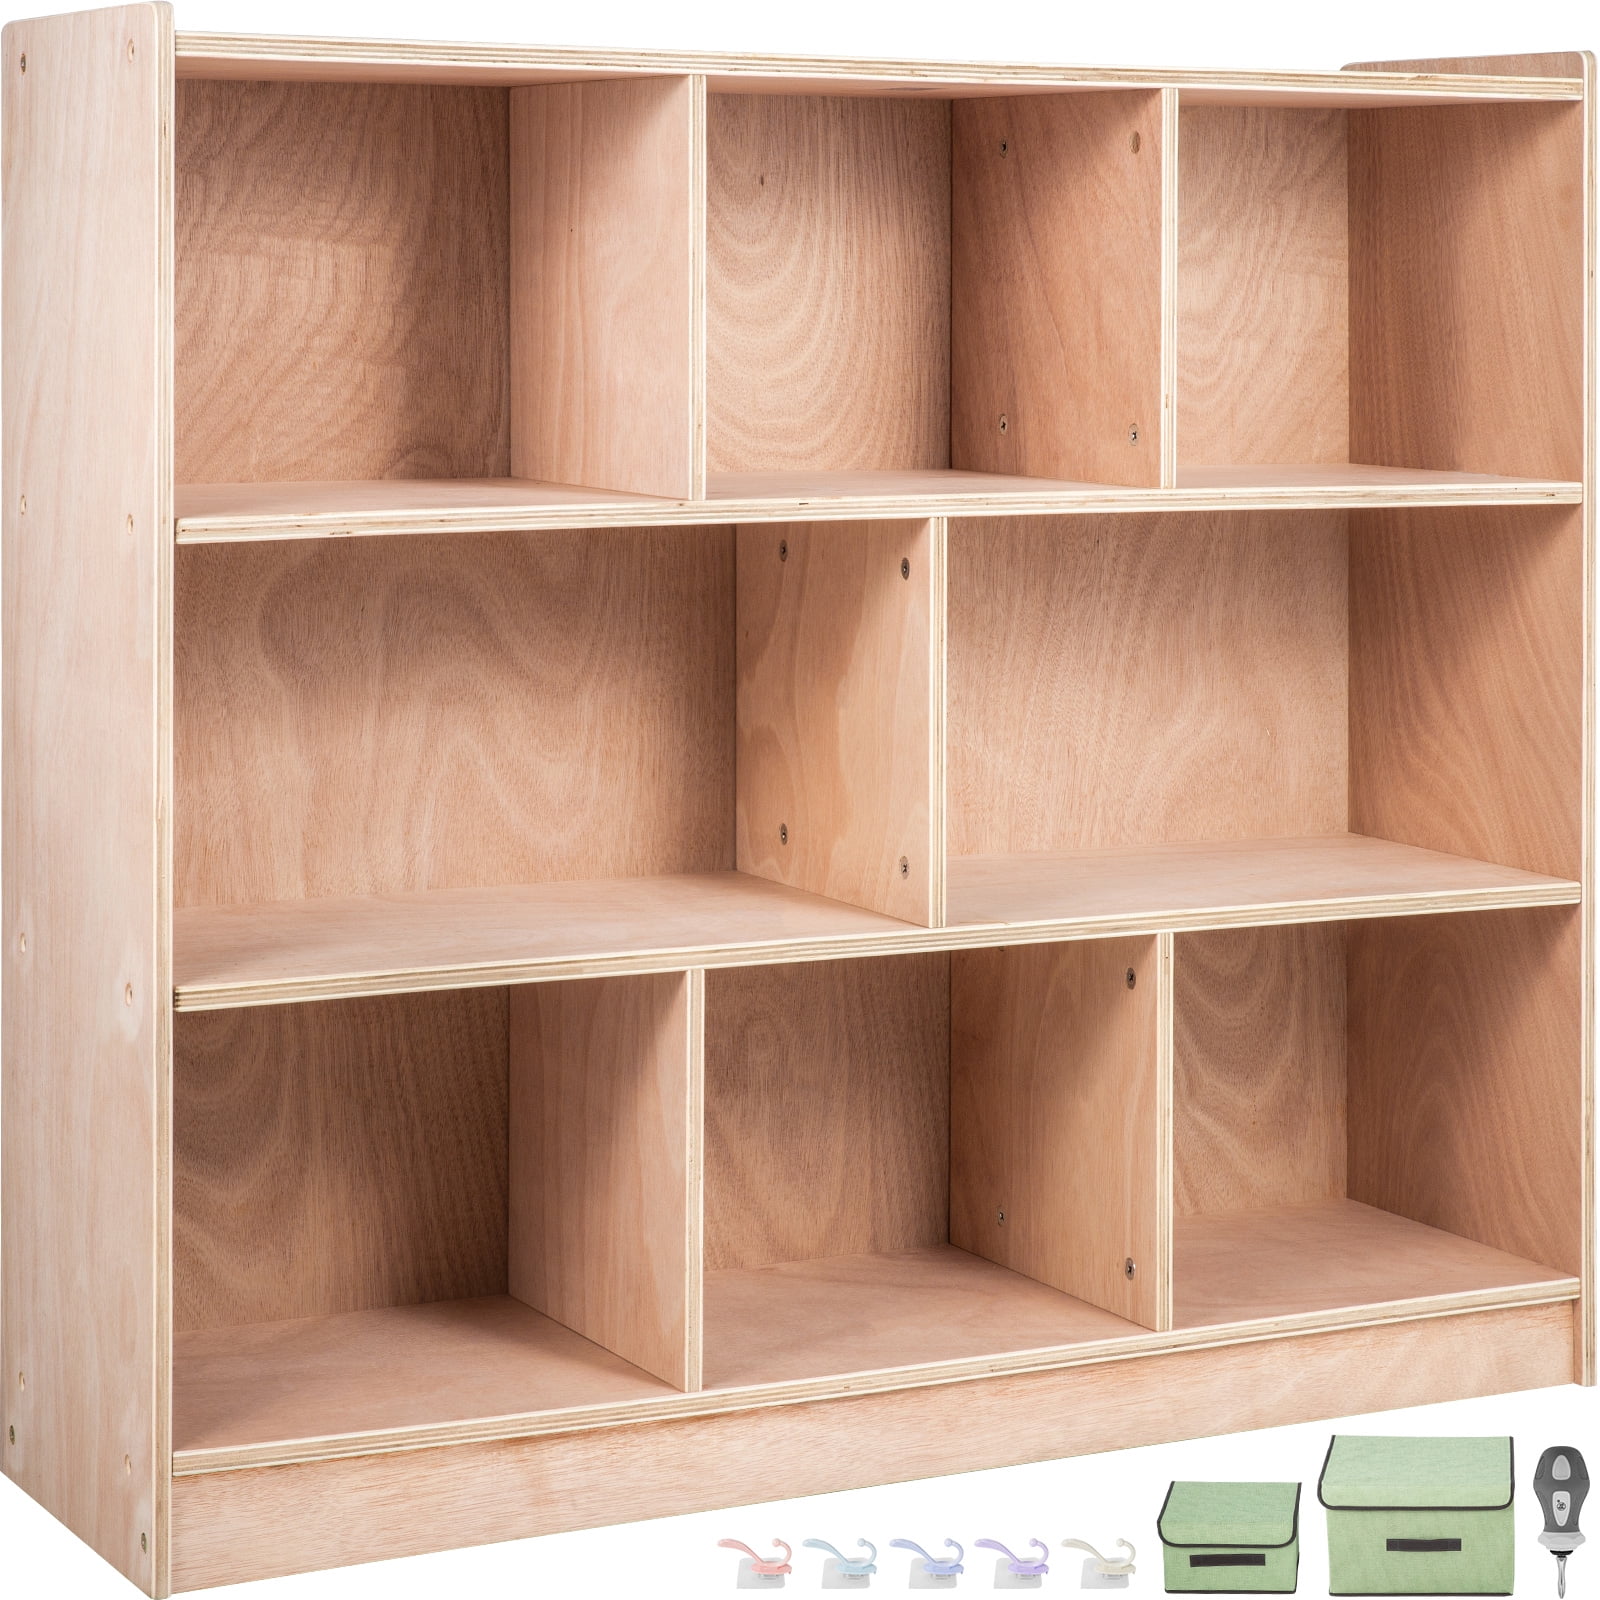 Luxor Modular Classroom Storage Cabinet - 4 Stacked Modules with 12 Large Bins